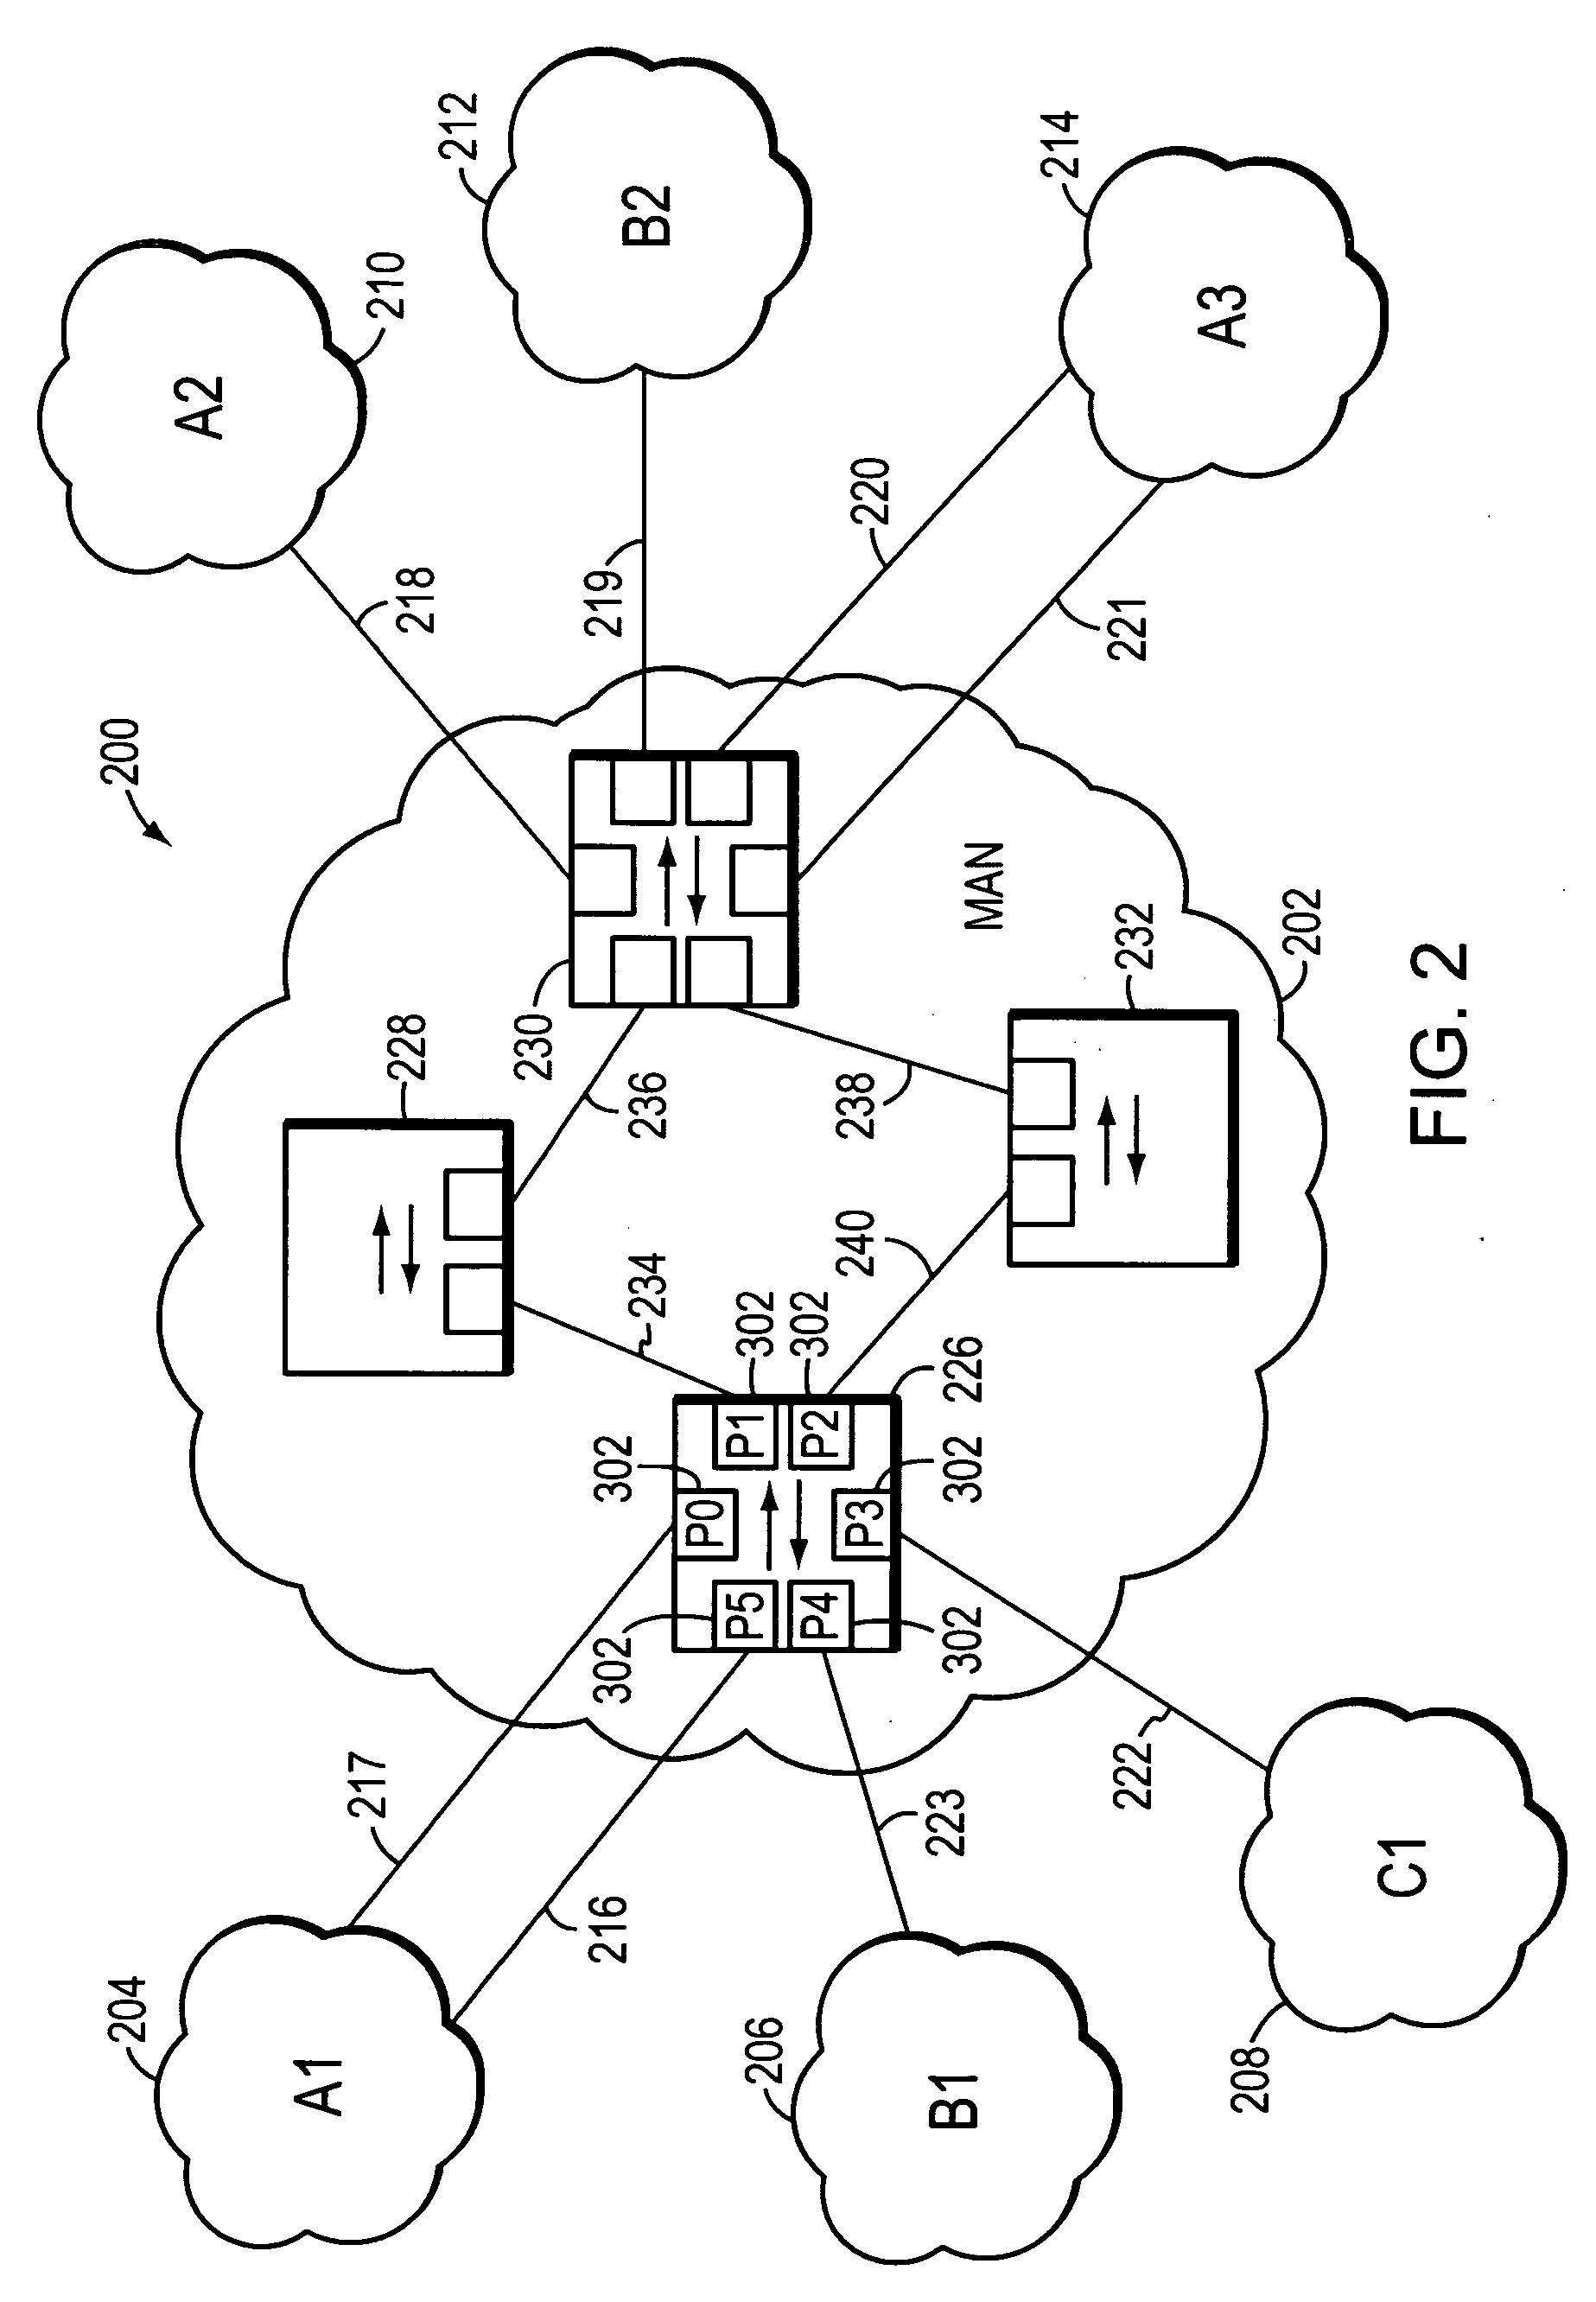 Multi-tiered virtual local area network (VLAN) domain mapping mechanism